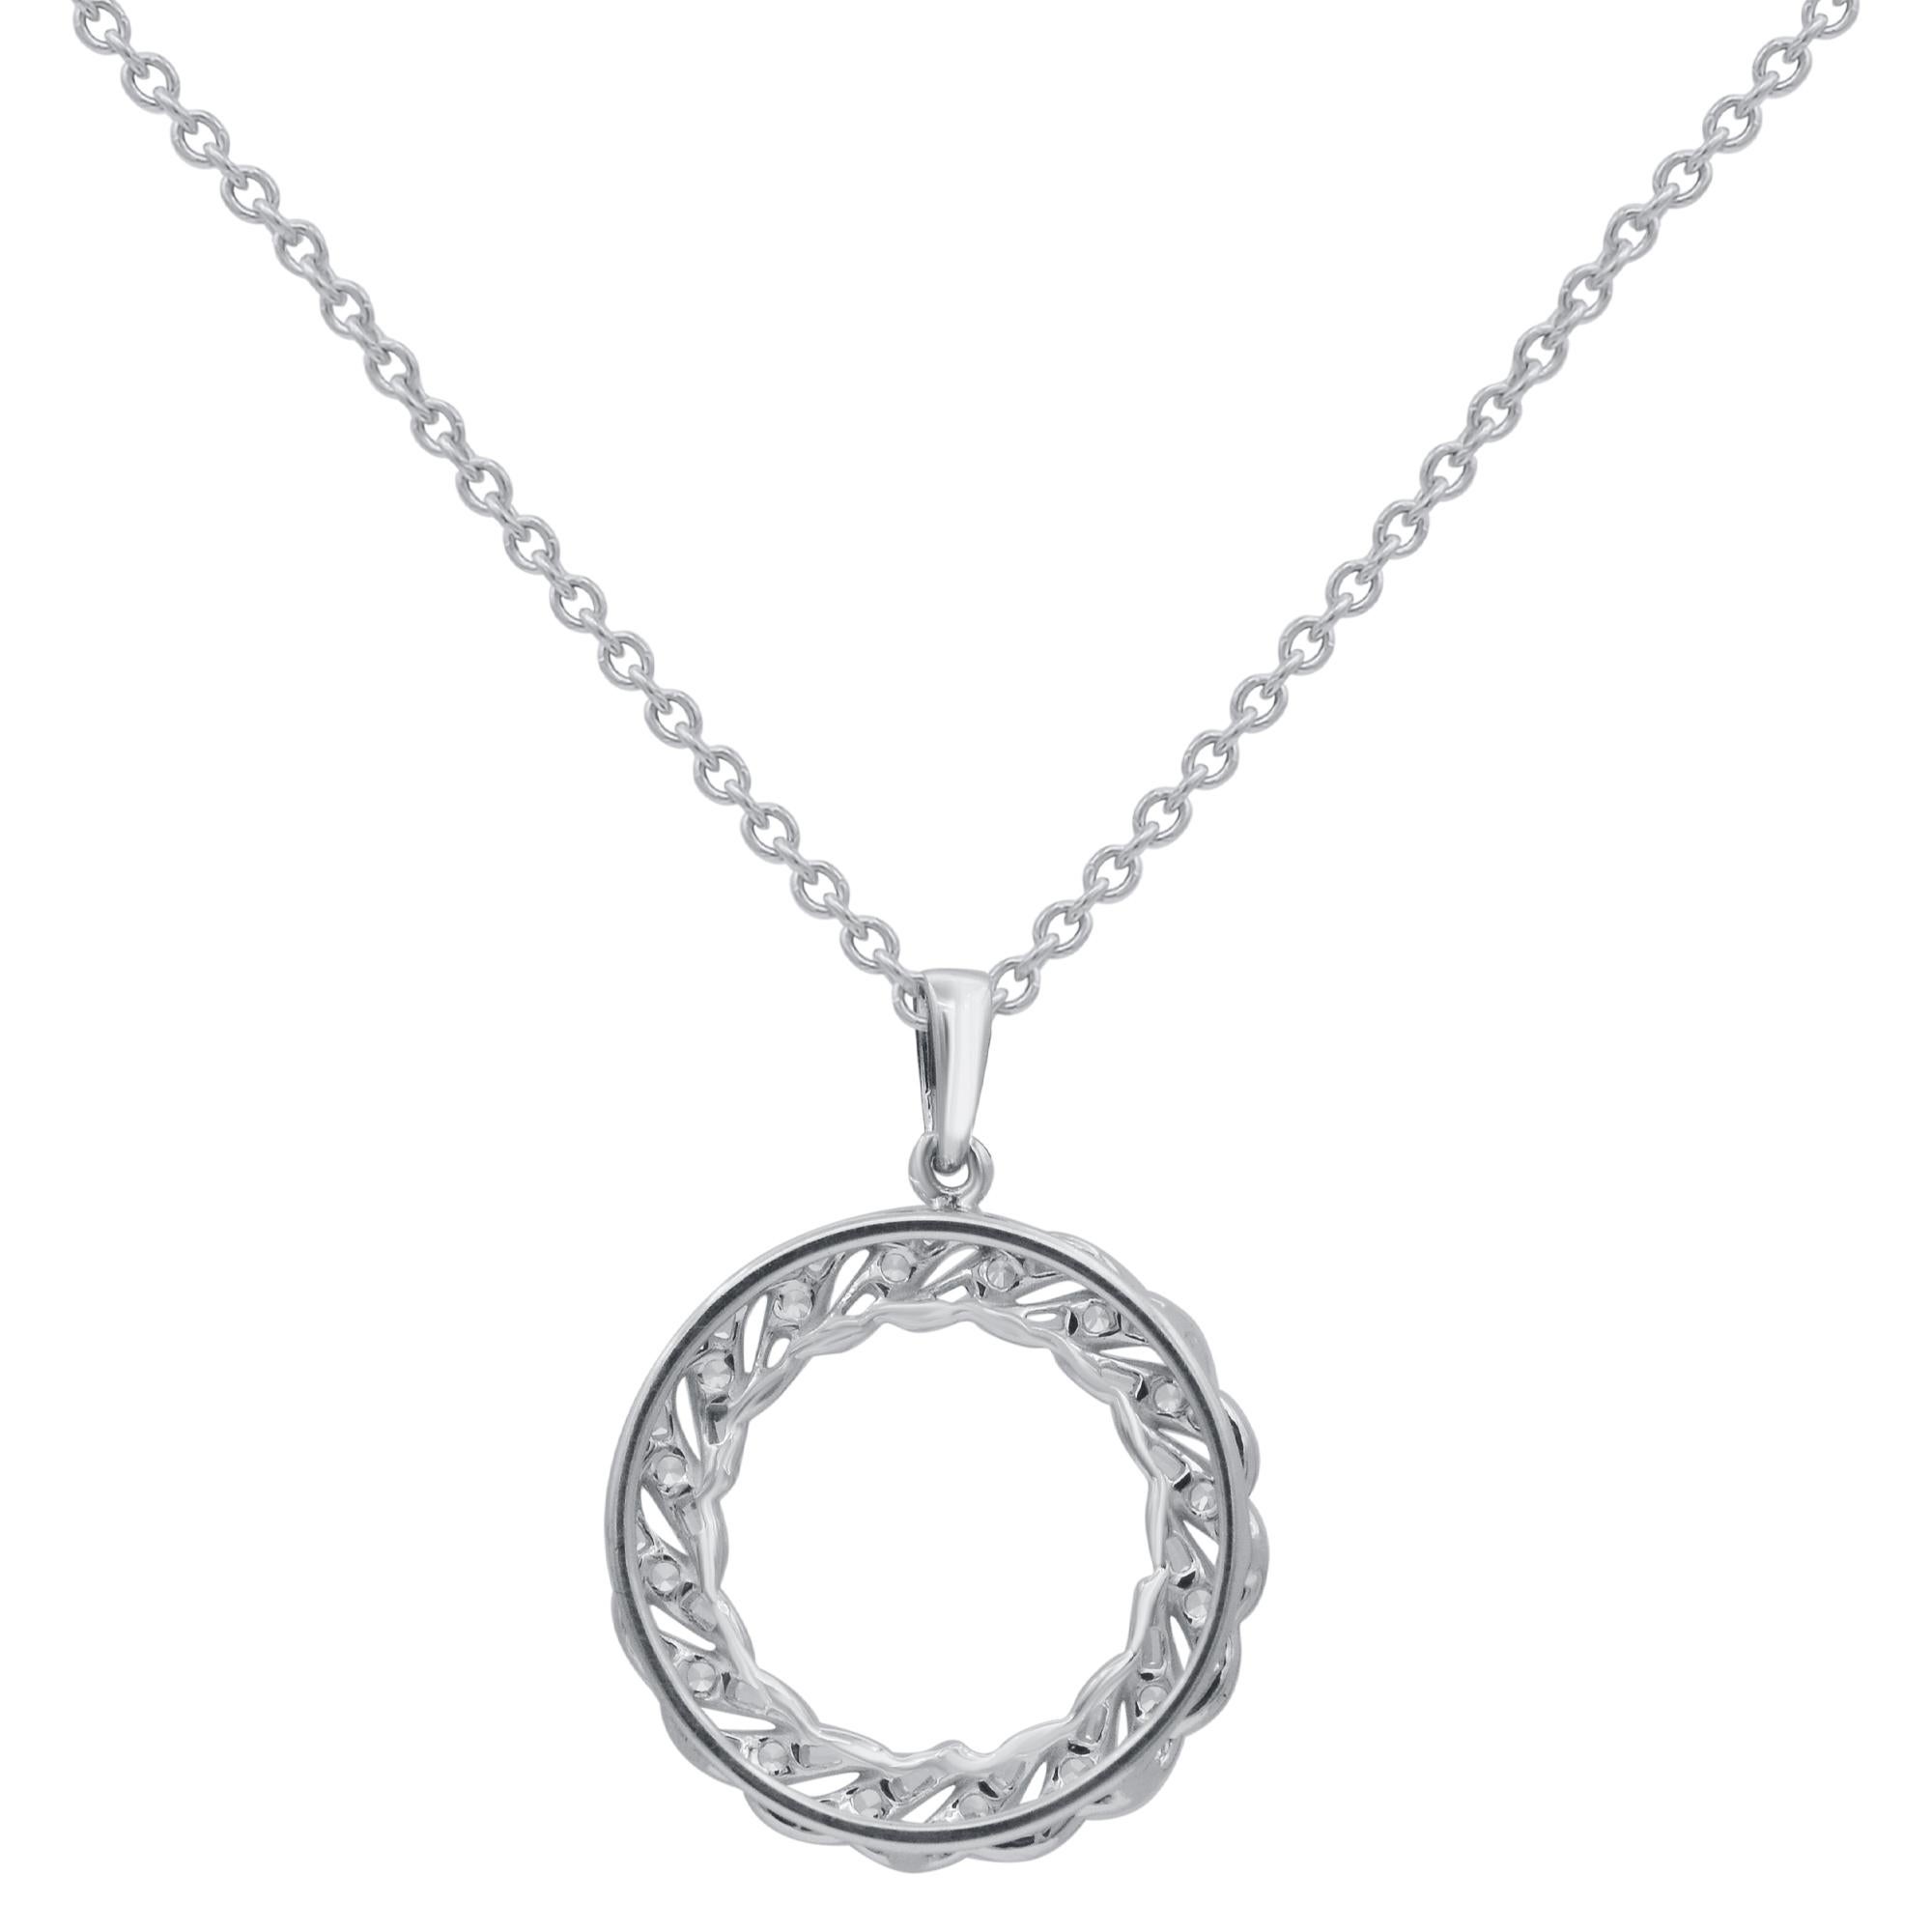 Make a bold statement of style and beliefs with the eye-catching elegance of this diamond pendant.  Beautifully crafted by our inhouse experts in 18 karat white gold and embellished with 48 round brilliant cut & baguette diamond set in prong and